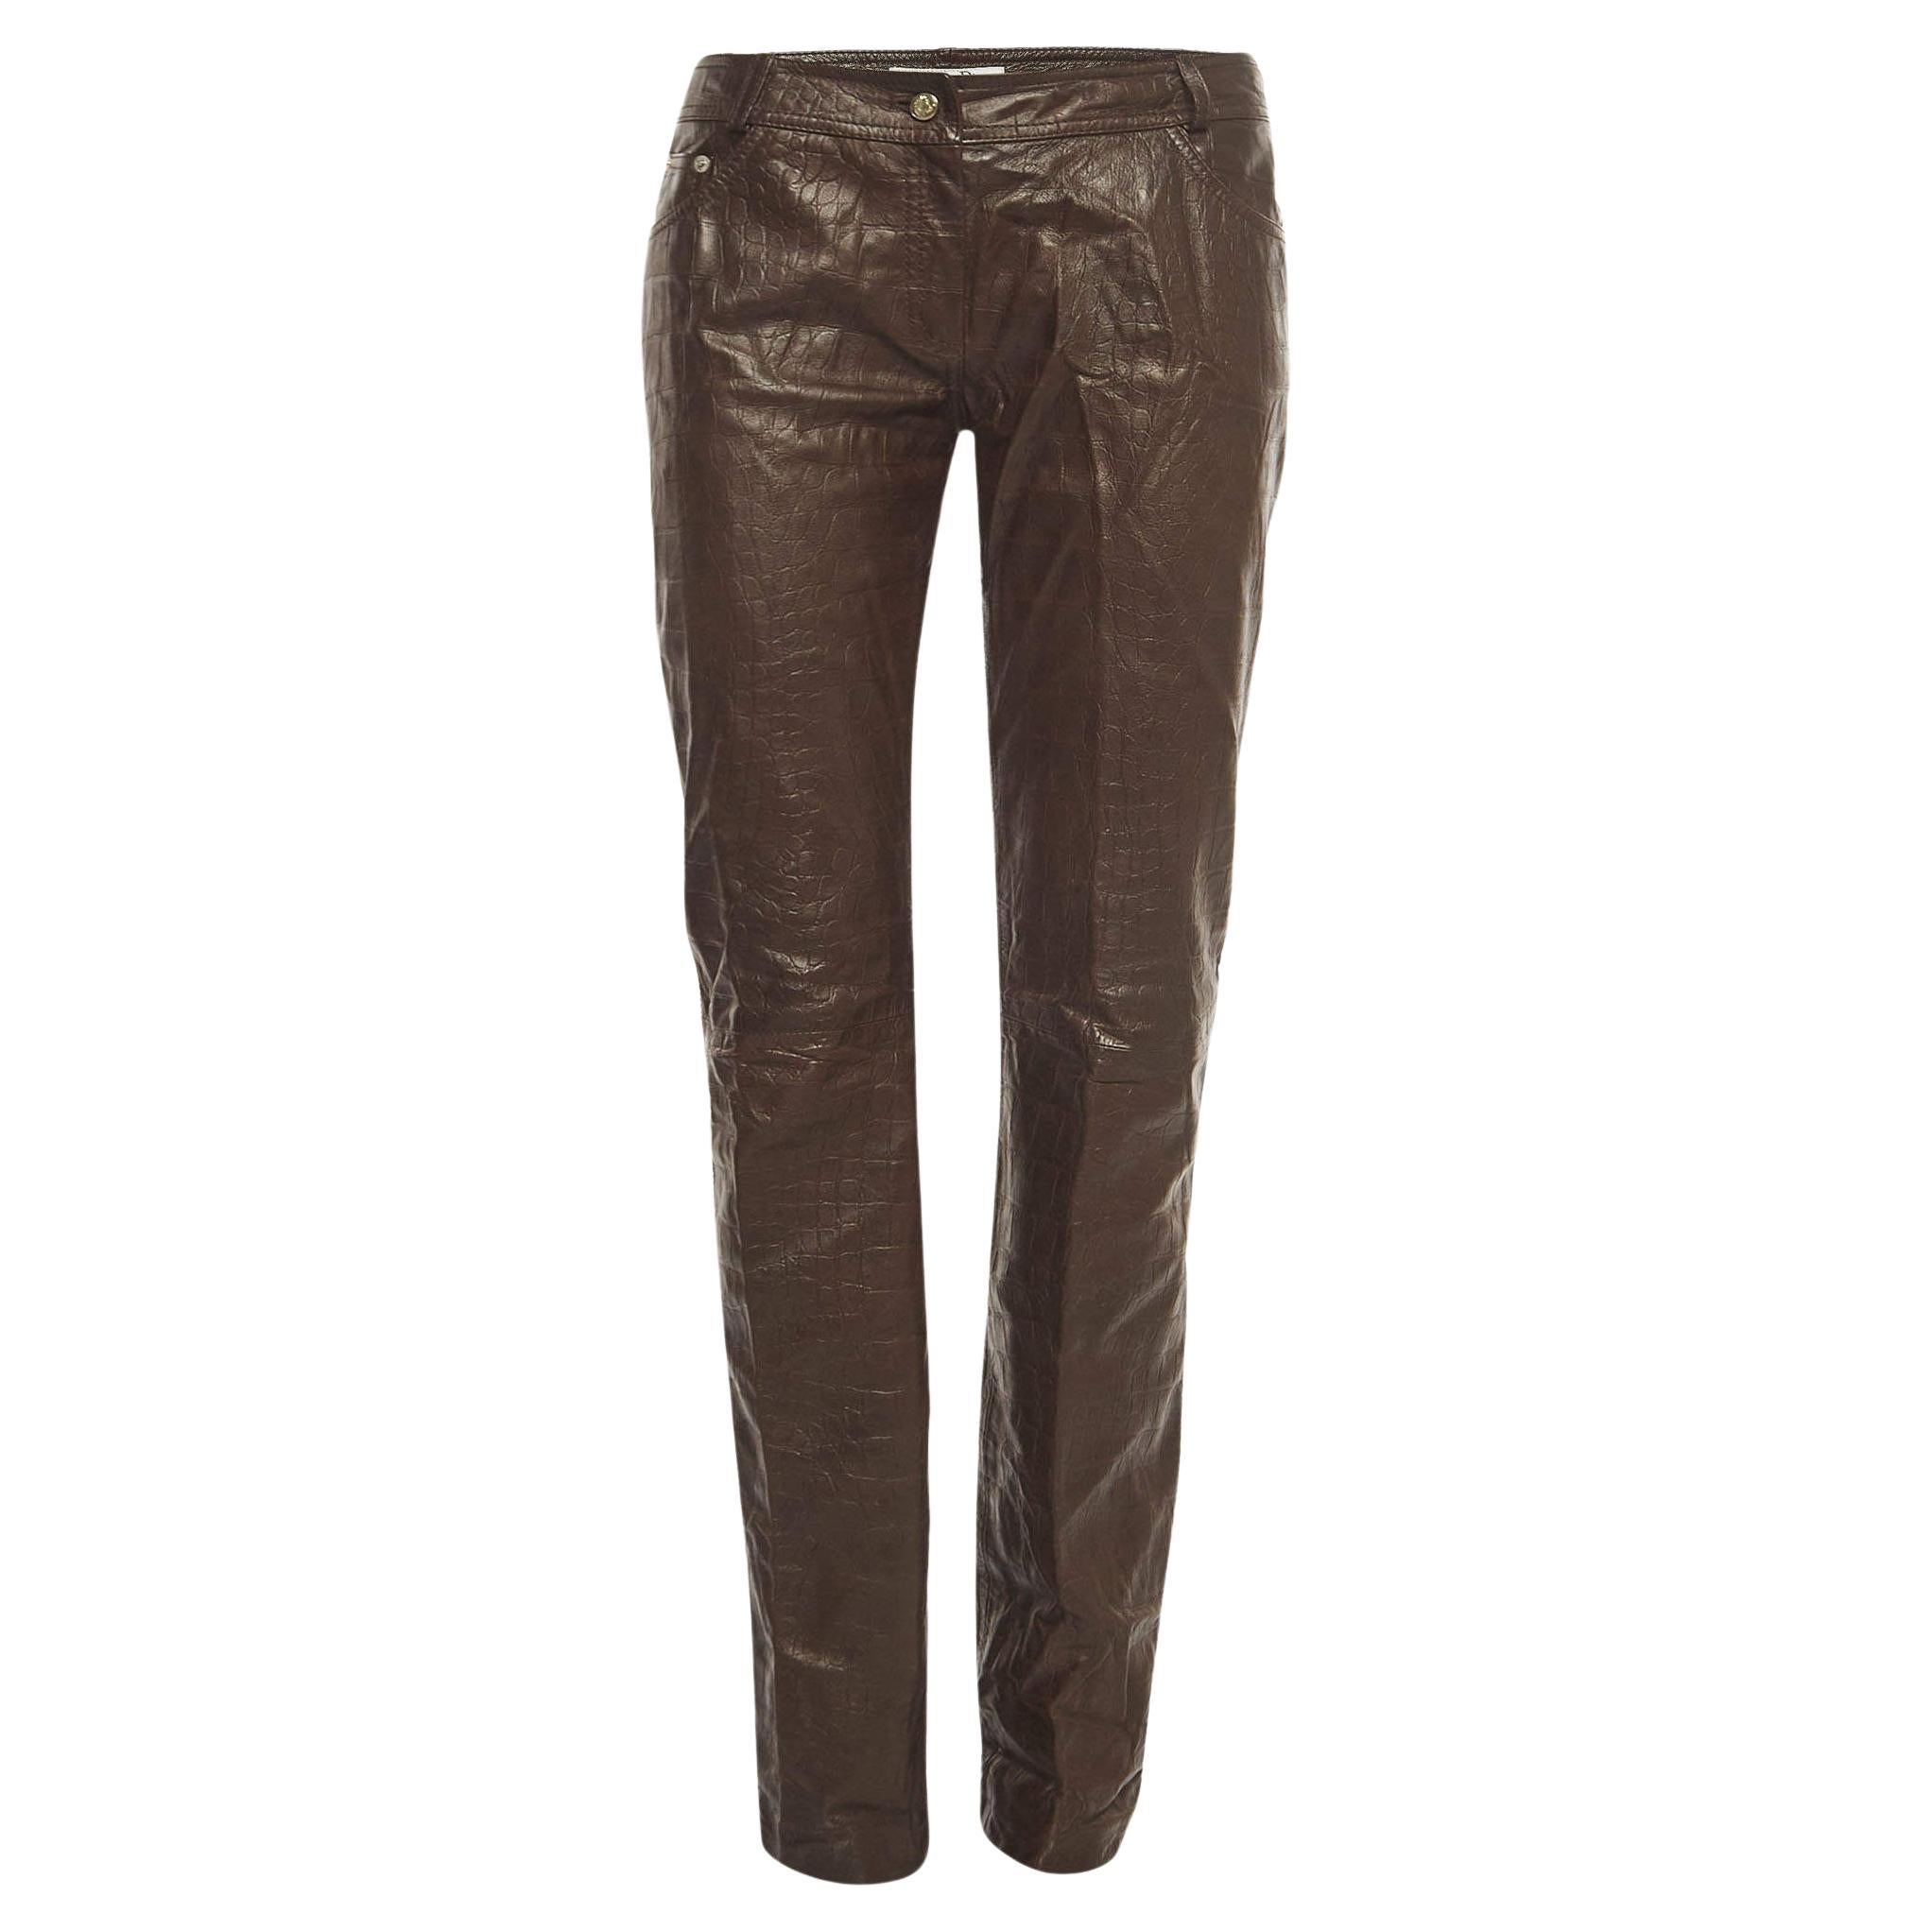 Christian Dior Boutique Brown Textured Leather Straight Leg Pants M